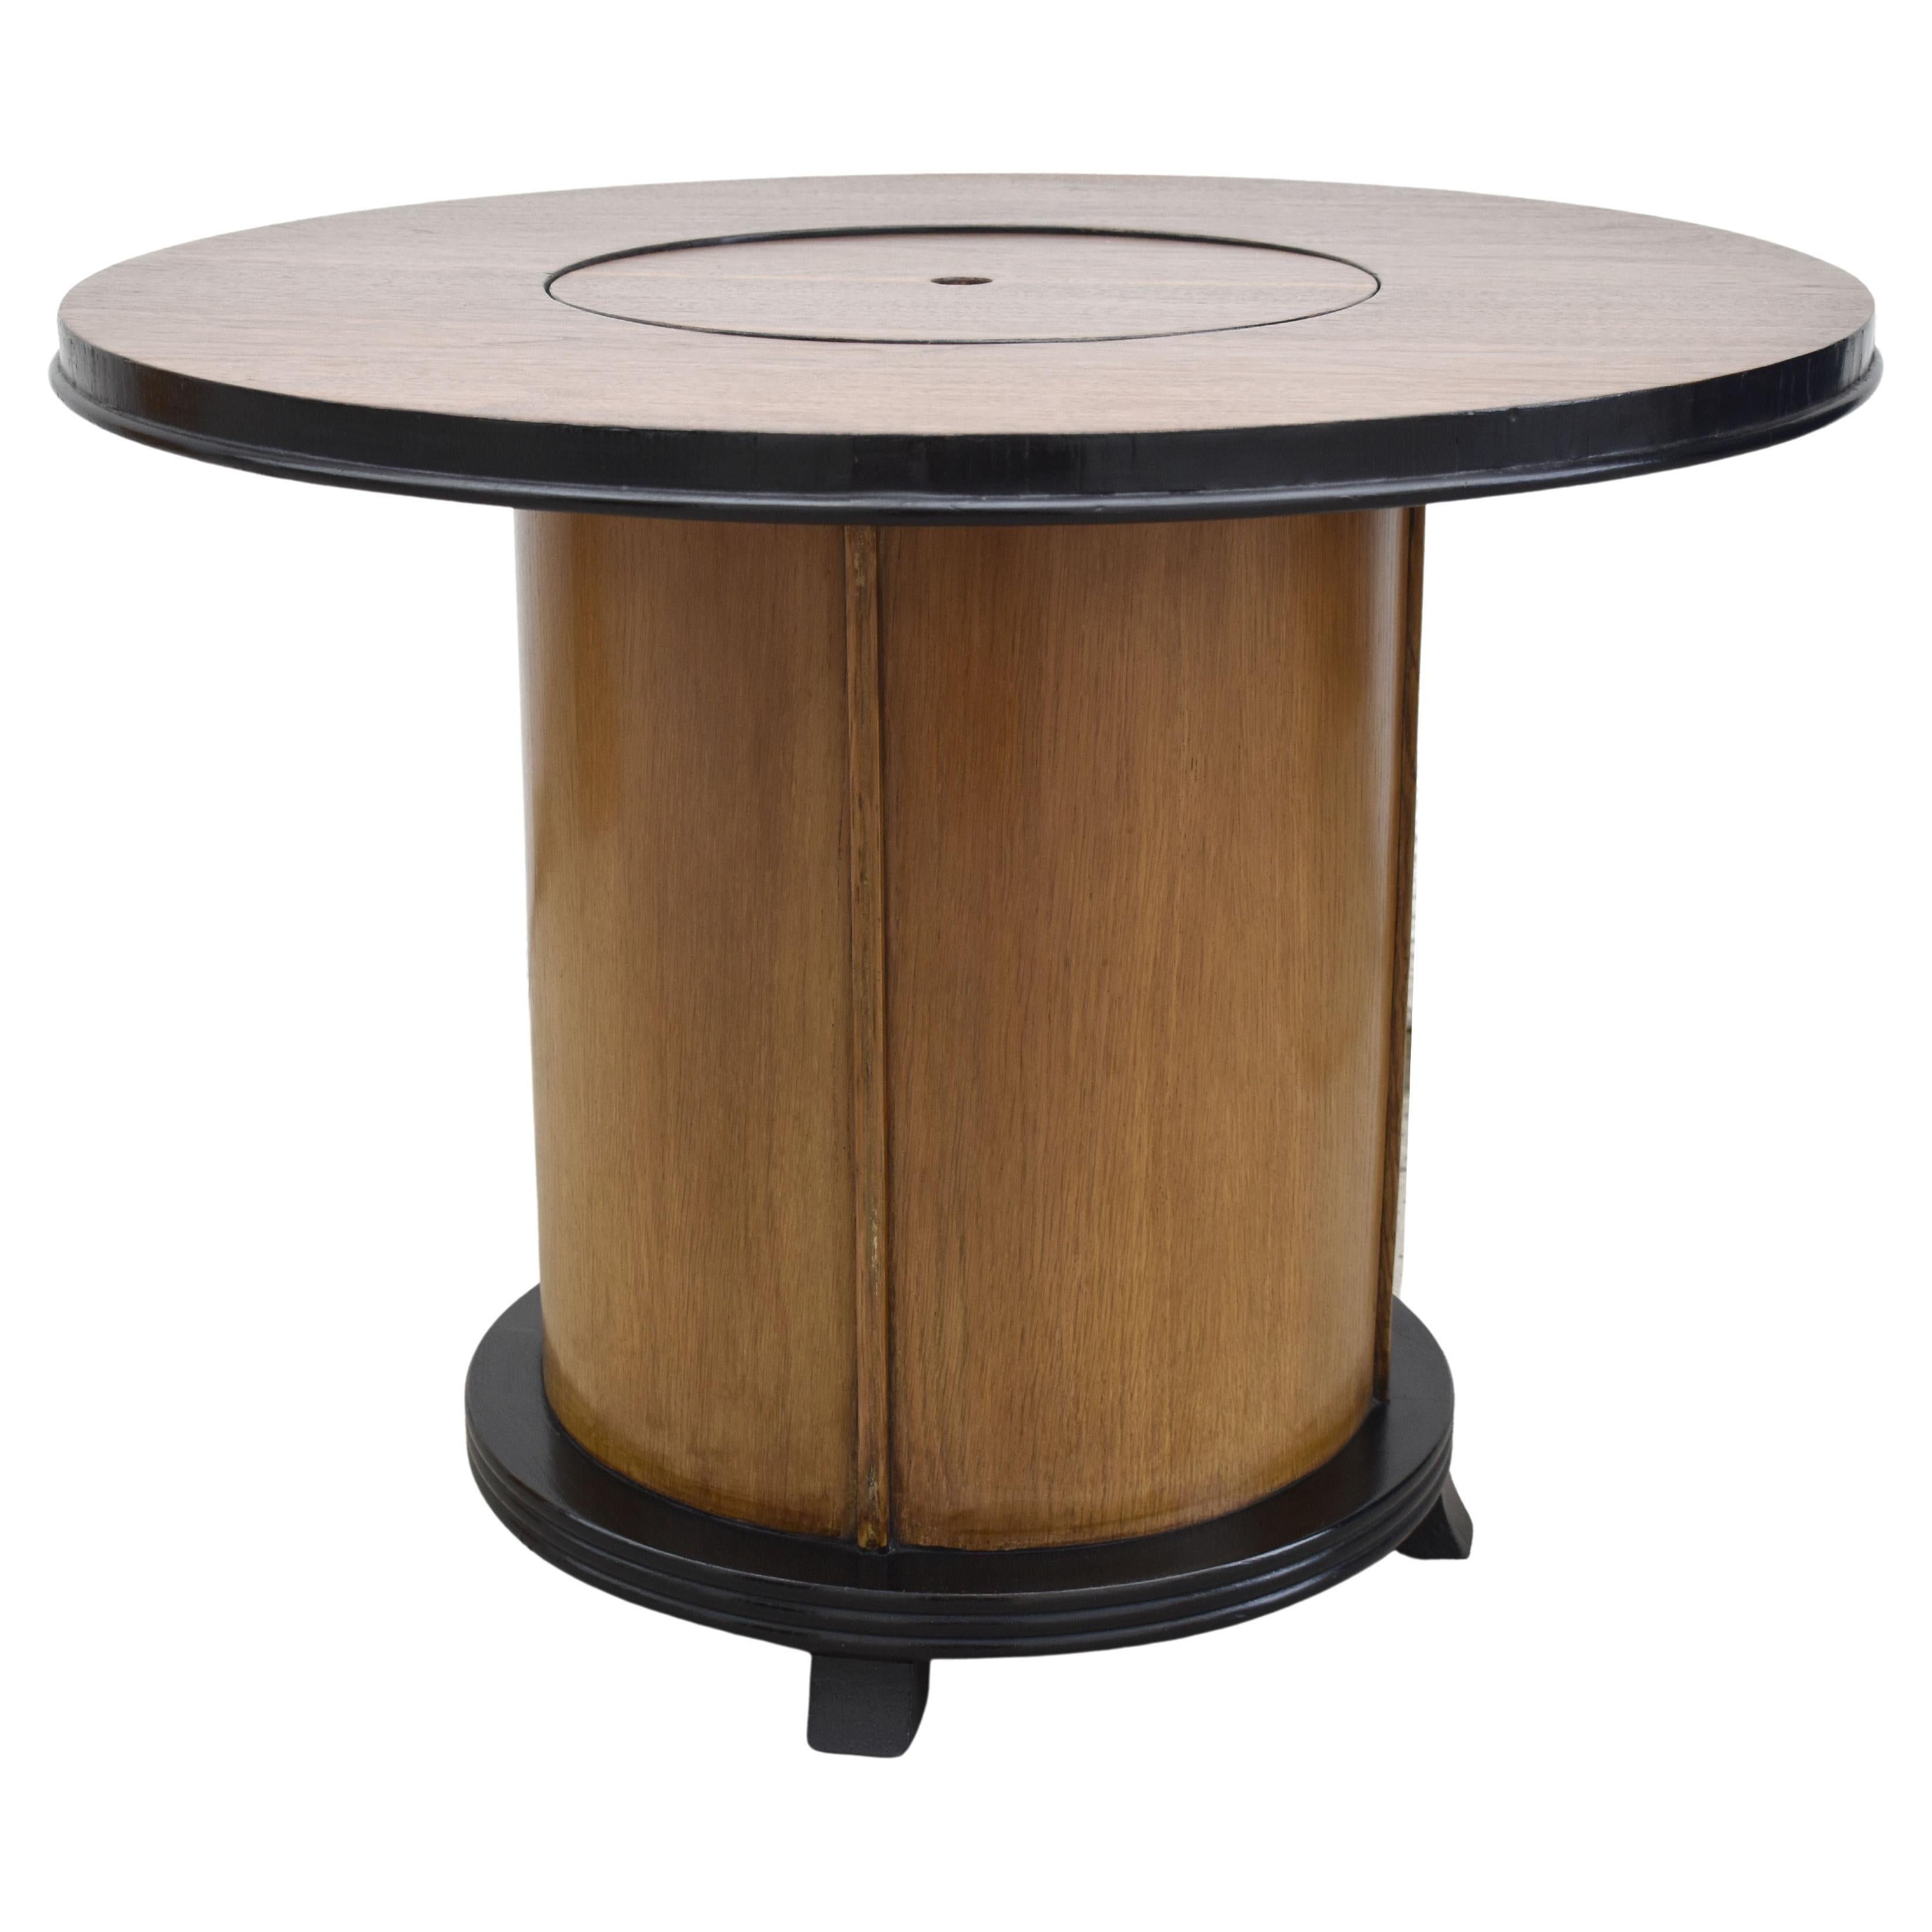 For your consideration is this rather fun and stylish original Art Deco English pop up cocktail table. When closed all you need do is press a central button which is centre to the table top and voila! up pops a second tier storage for your glasses